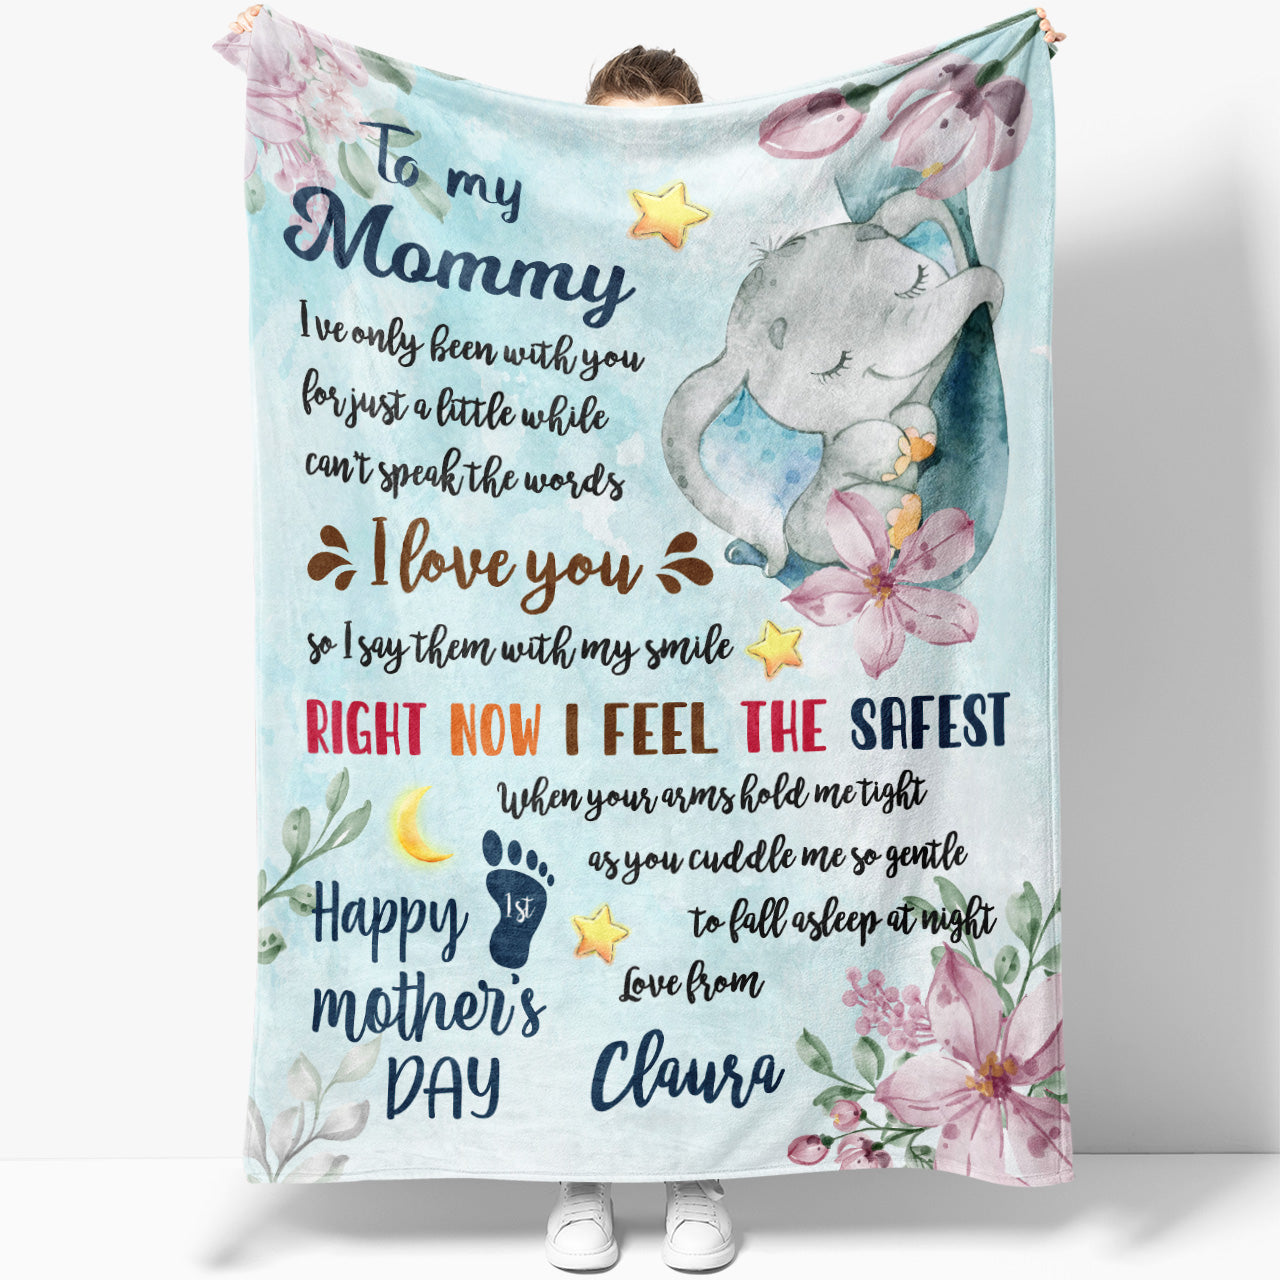 Blanket Gift Ideas For Mom, Thoughtful First Mothers Day Gifts Ideas, Baby  Elephant, Gift Ideas For Expecting Mothers, Unique Gift Idea For Mom To Be  - Sweet Family Gift